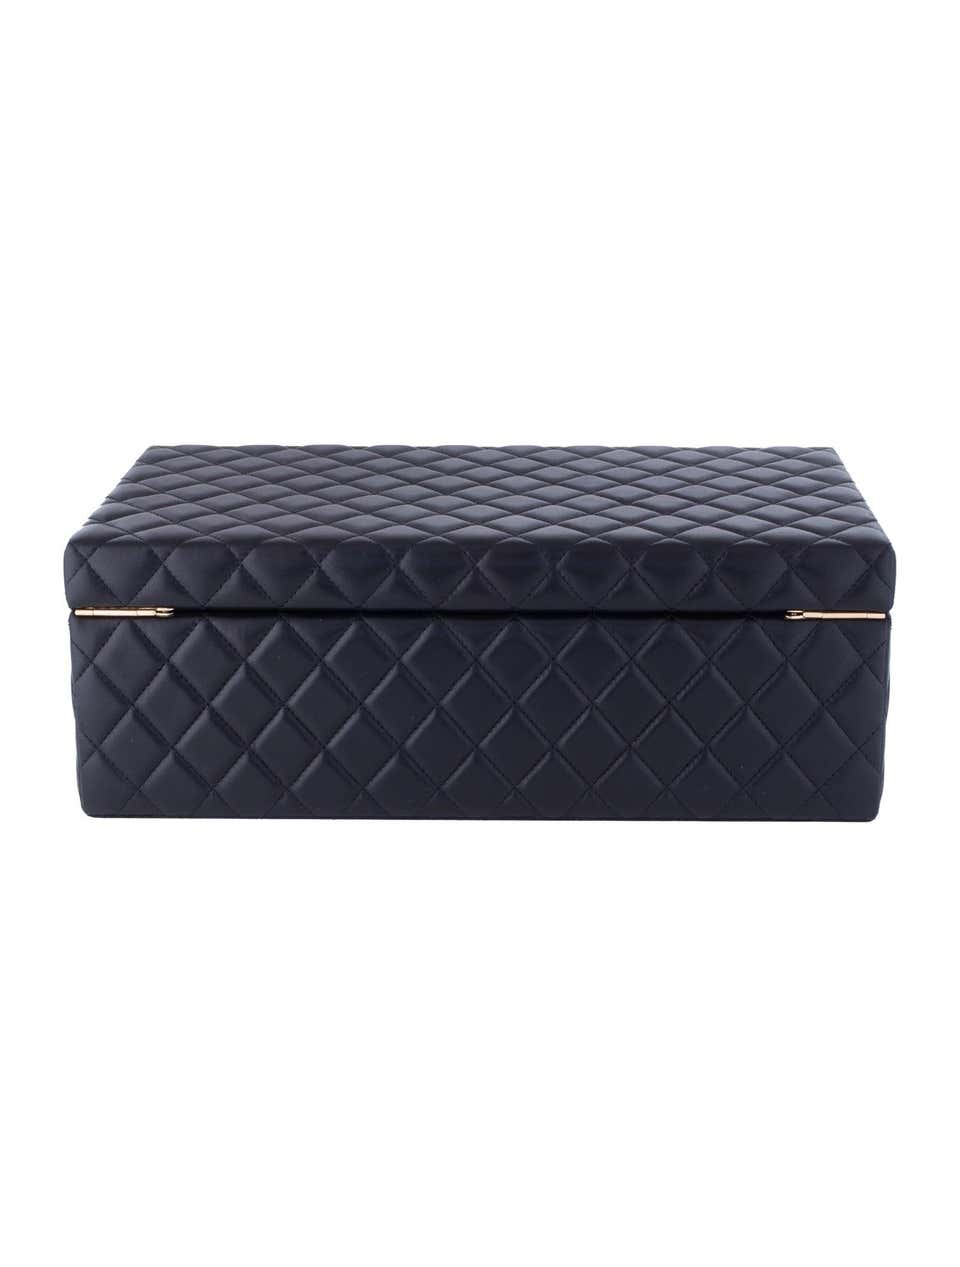 Chanel Limited Edition Black Vanity Case Rare Home Decor Jewelry